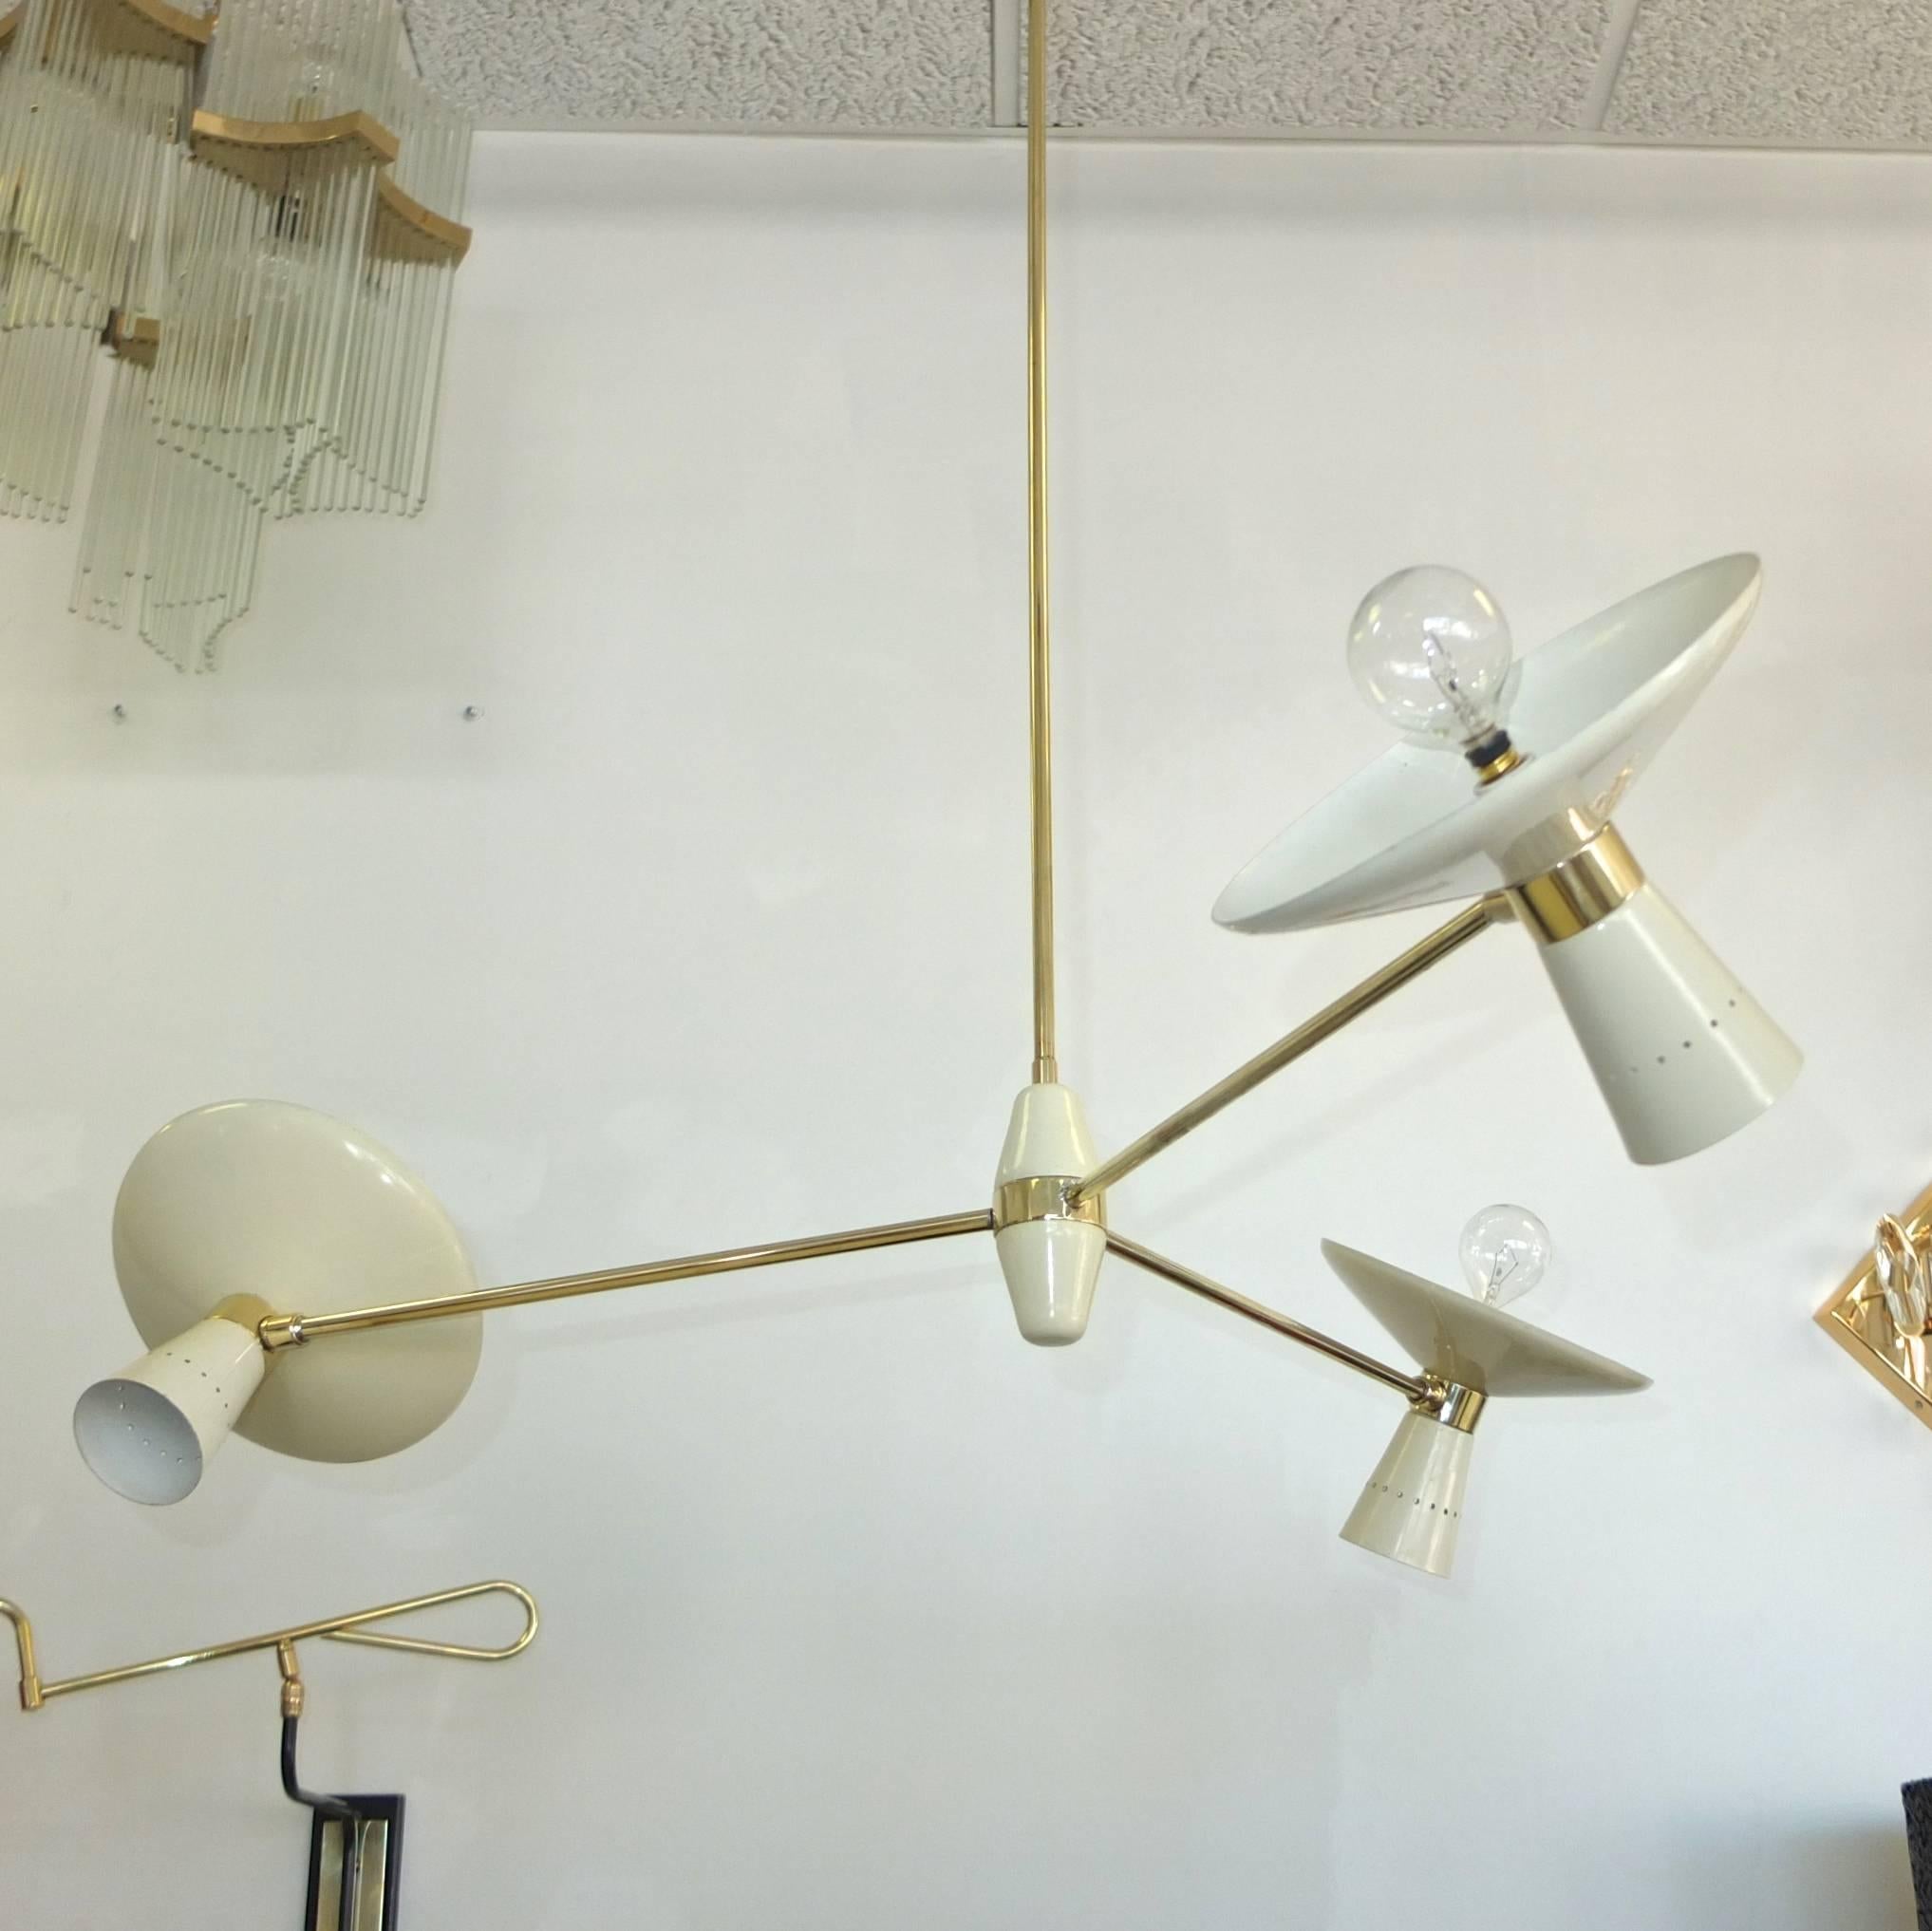 1960s Italian three-arm suspension chandelier by G.C.M.E. (Giulio Compagnini Montecatini Elettricita`)

Suspended by a brass rod to a double cone and brass cluster body off which radiate three fixed brass 13 inch arms terminating with brass swivel